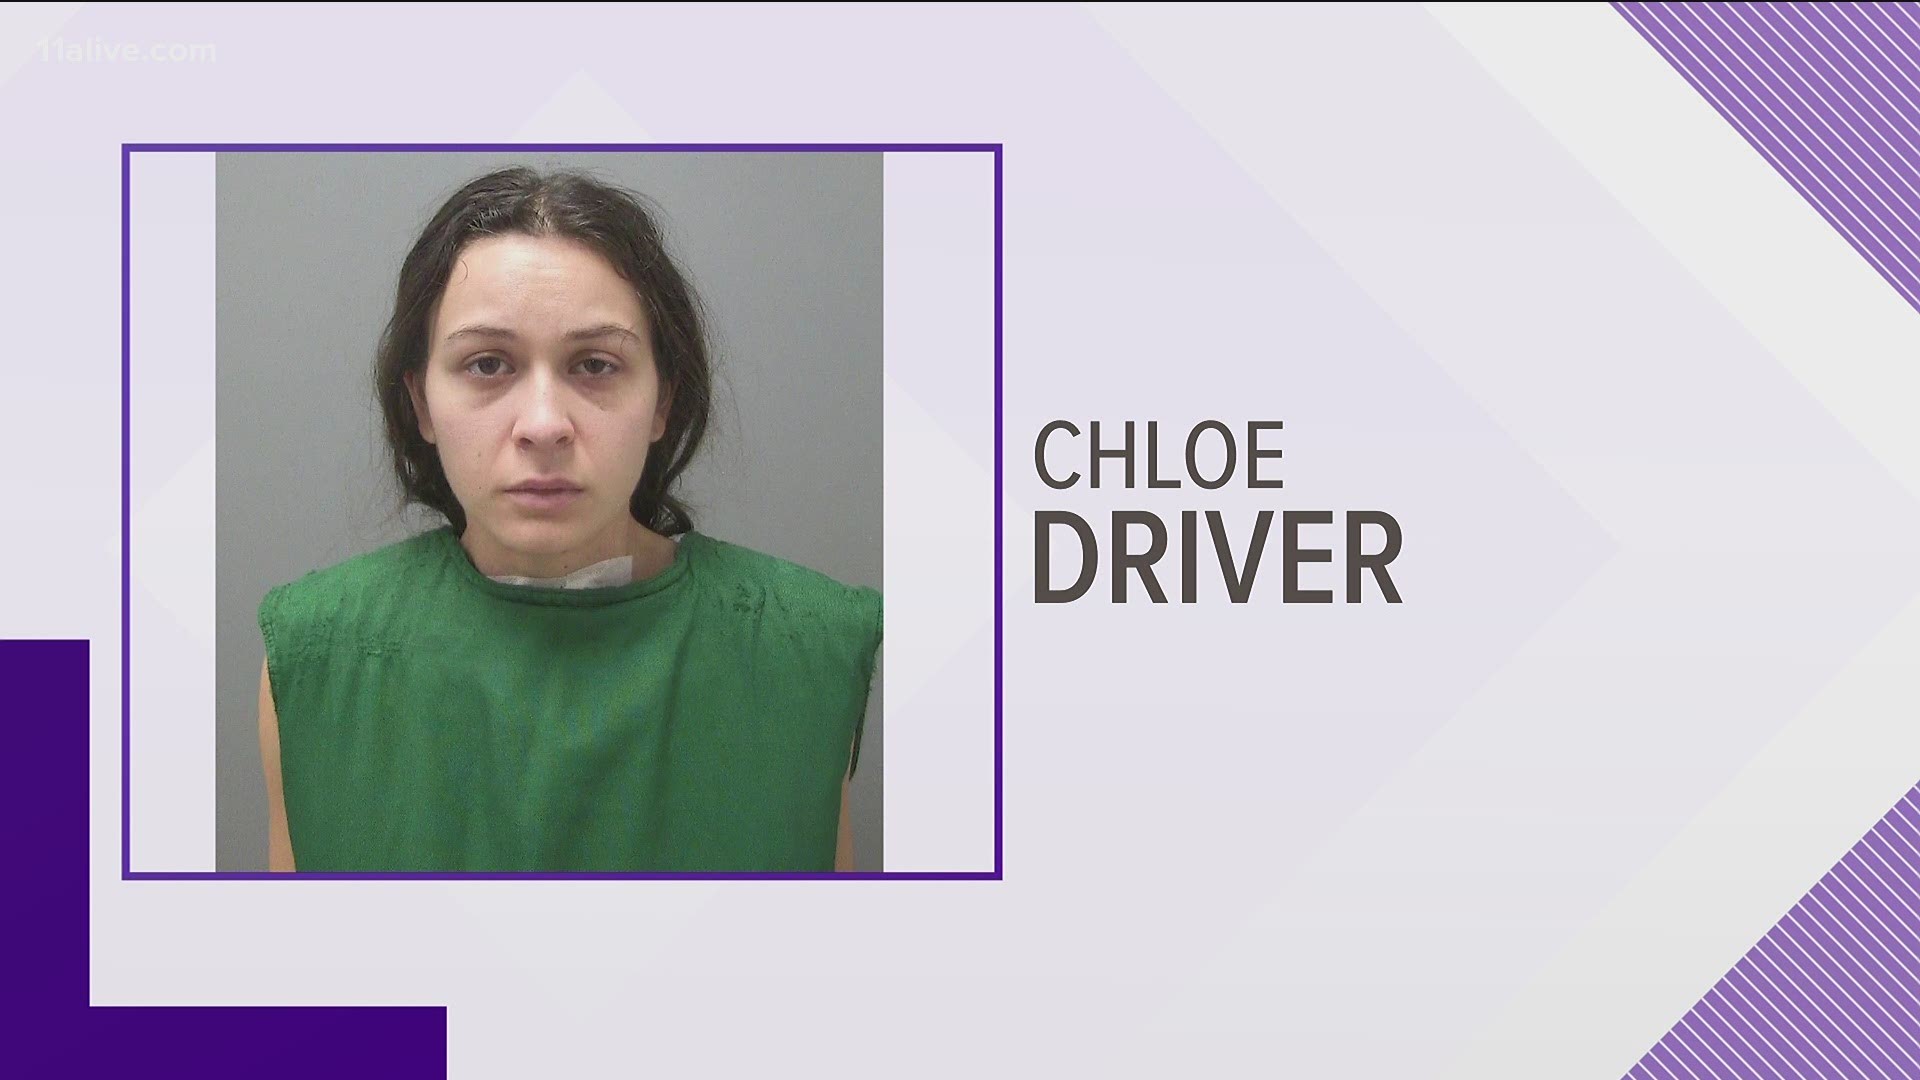 Chloe Driver is charged with murder in the case.